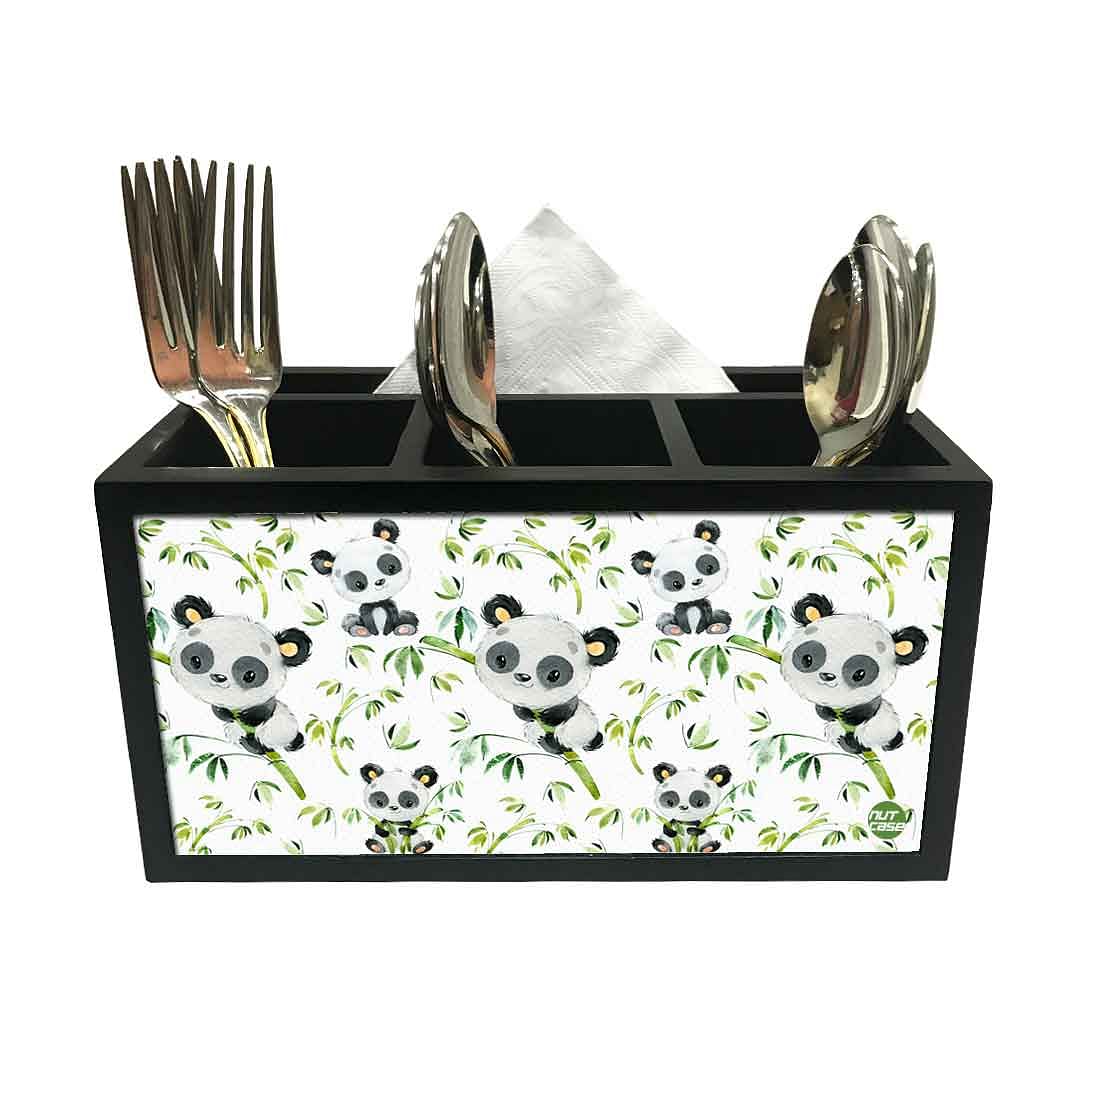 Nutcase Designer Cutlery Tissue Holder Stand Napkin Spoons Forks Knives Organizer - (CUTLERY NOT INCLUDED) -Made in India - Cute koala Nutcase